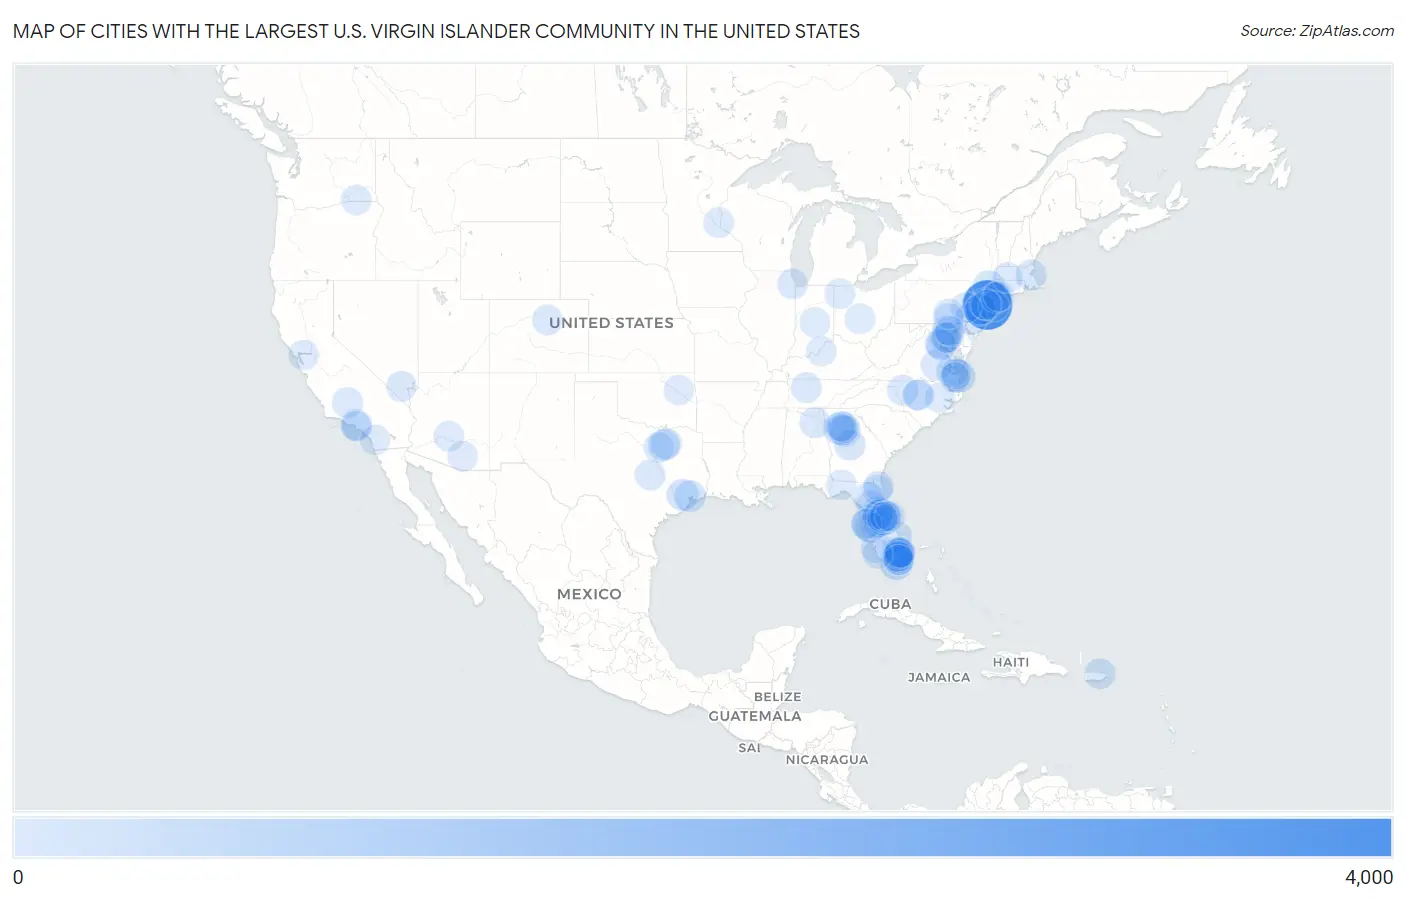 Cities with the Largest U.S. Virgin Islander Community in the United States Map